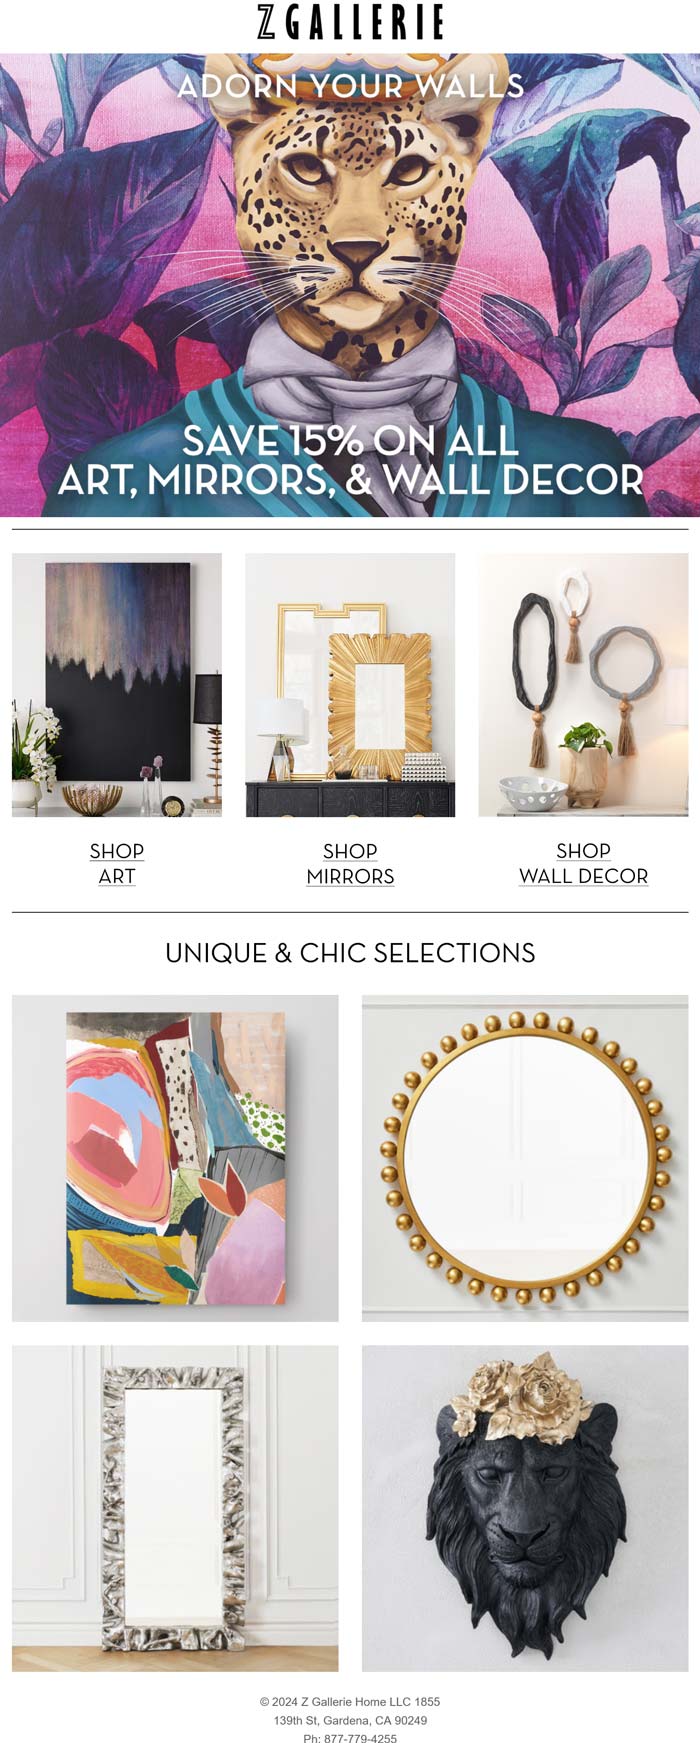 Z Gallerie stores Coupon  15% off all art, mirrors & wall decor at Z Gallerie #zgallerie 